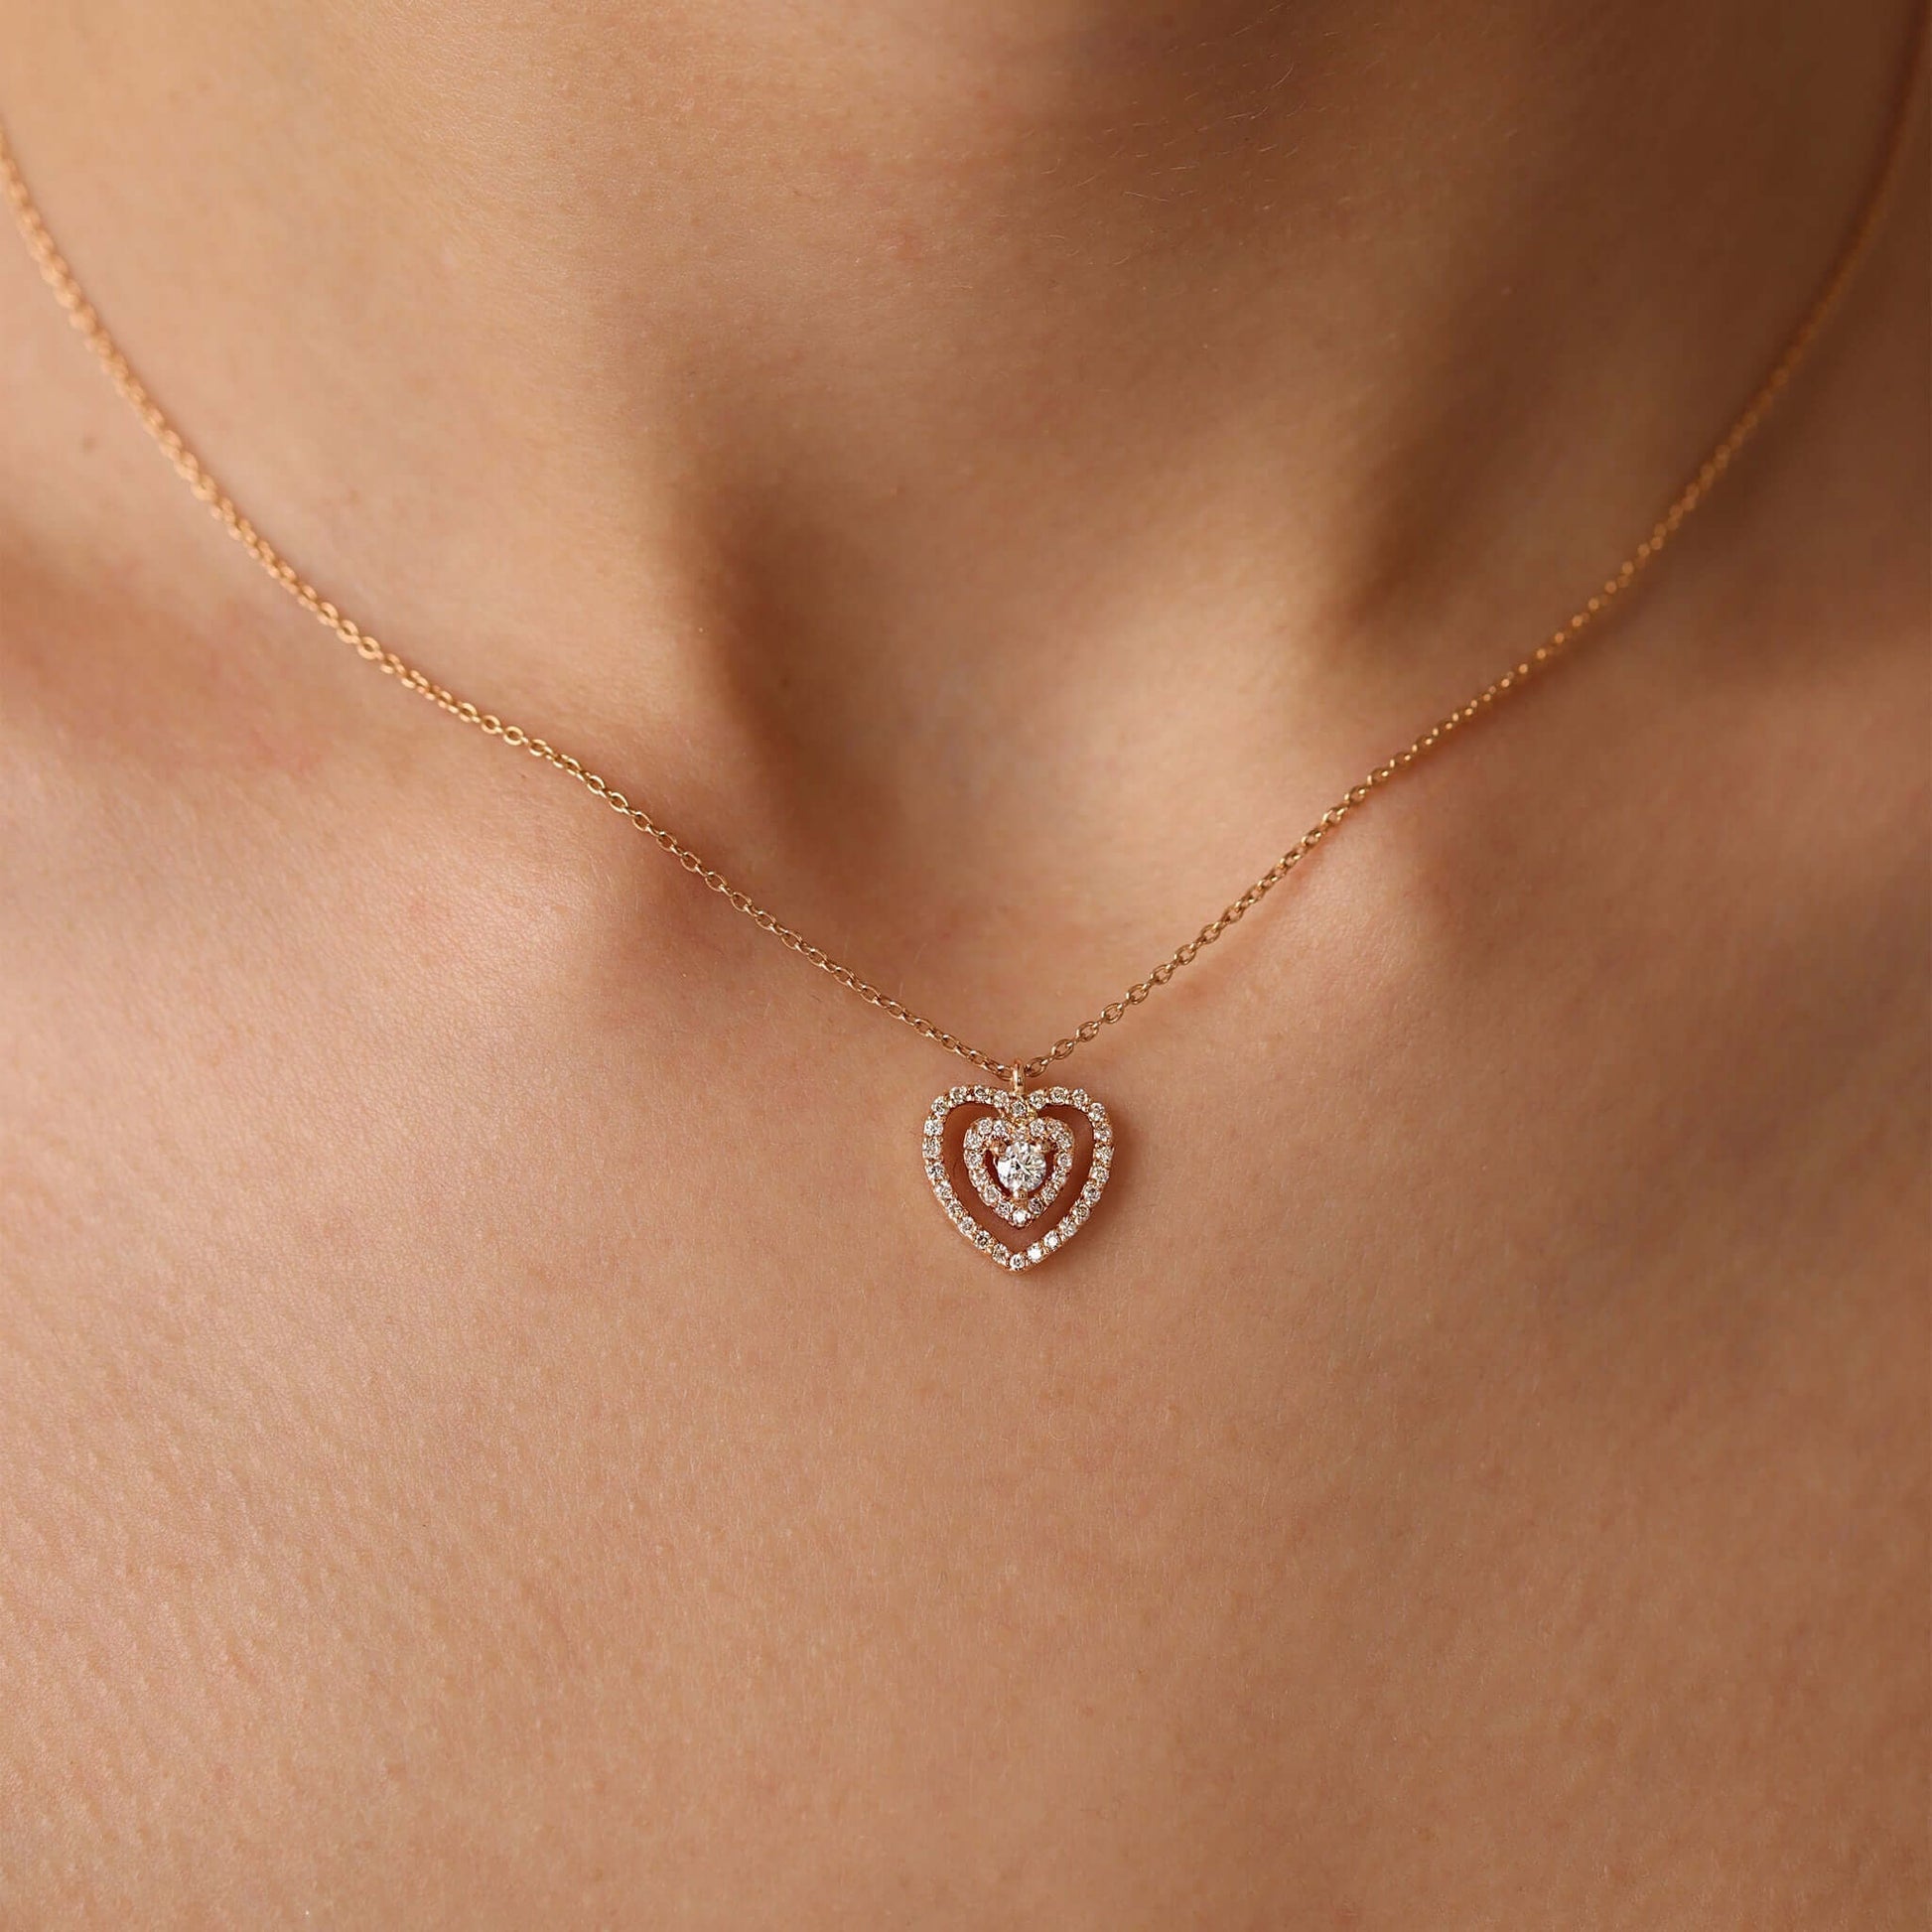 Jewelry Hearts | Diamond Pendant | 0.39 Cts. | 18K Gold - necklace Zengoda Shop online from Artisan Brands